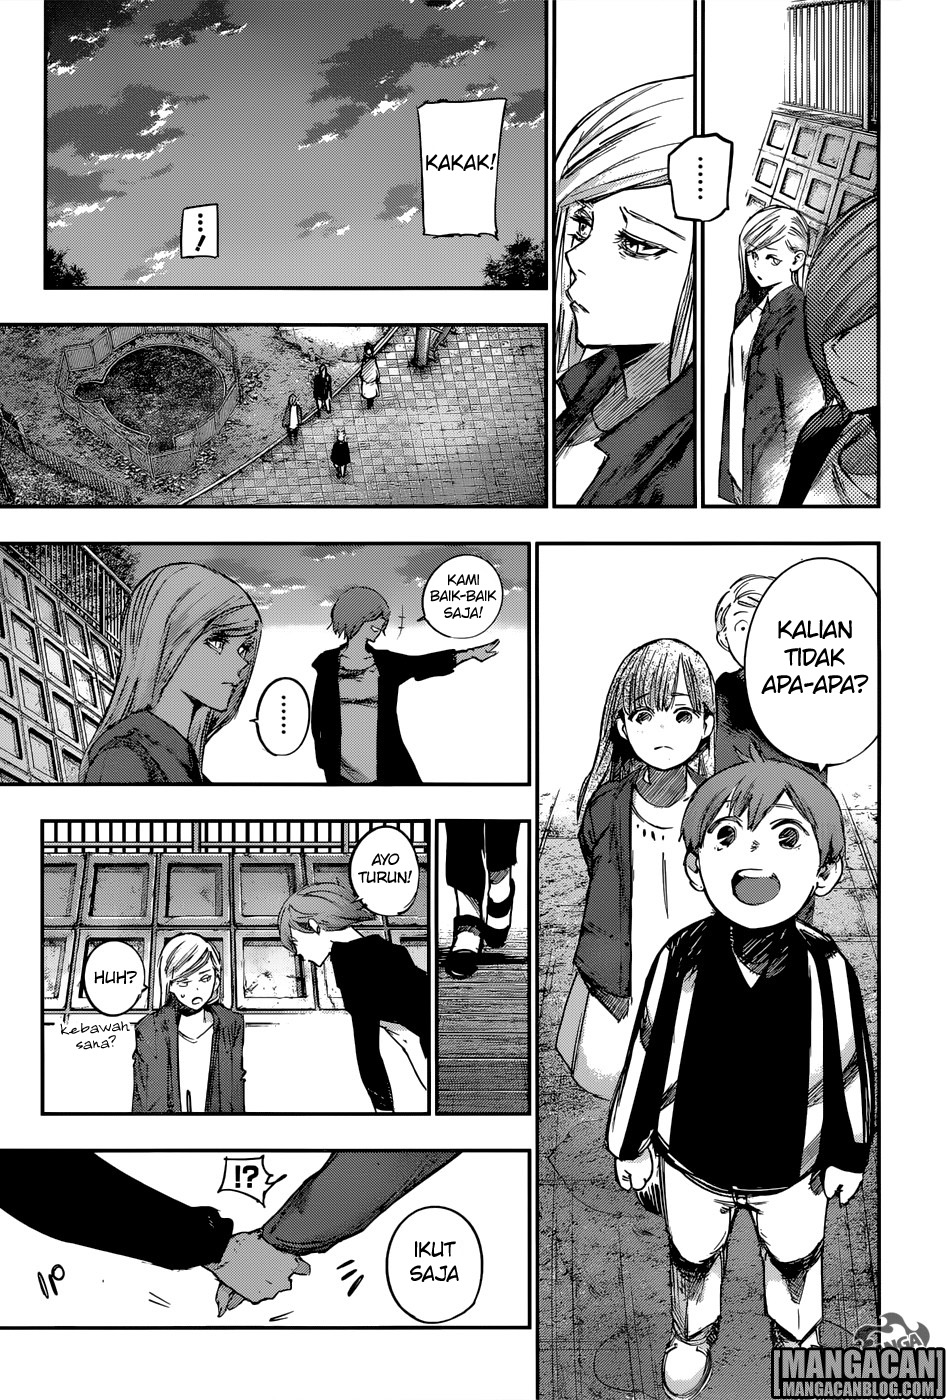 Tokyo Ghoul:re Chapter 120